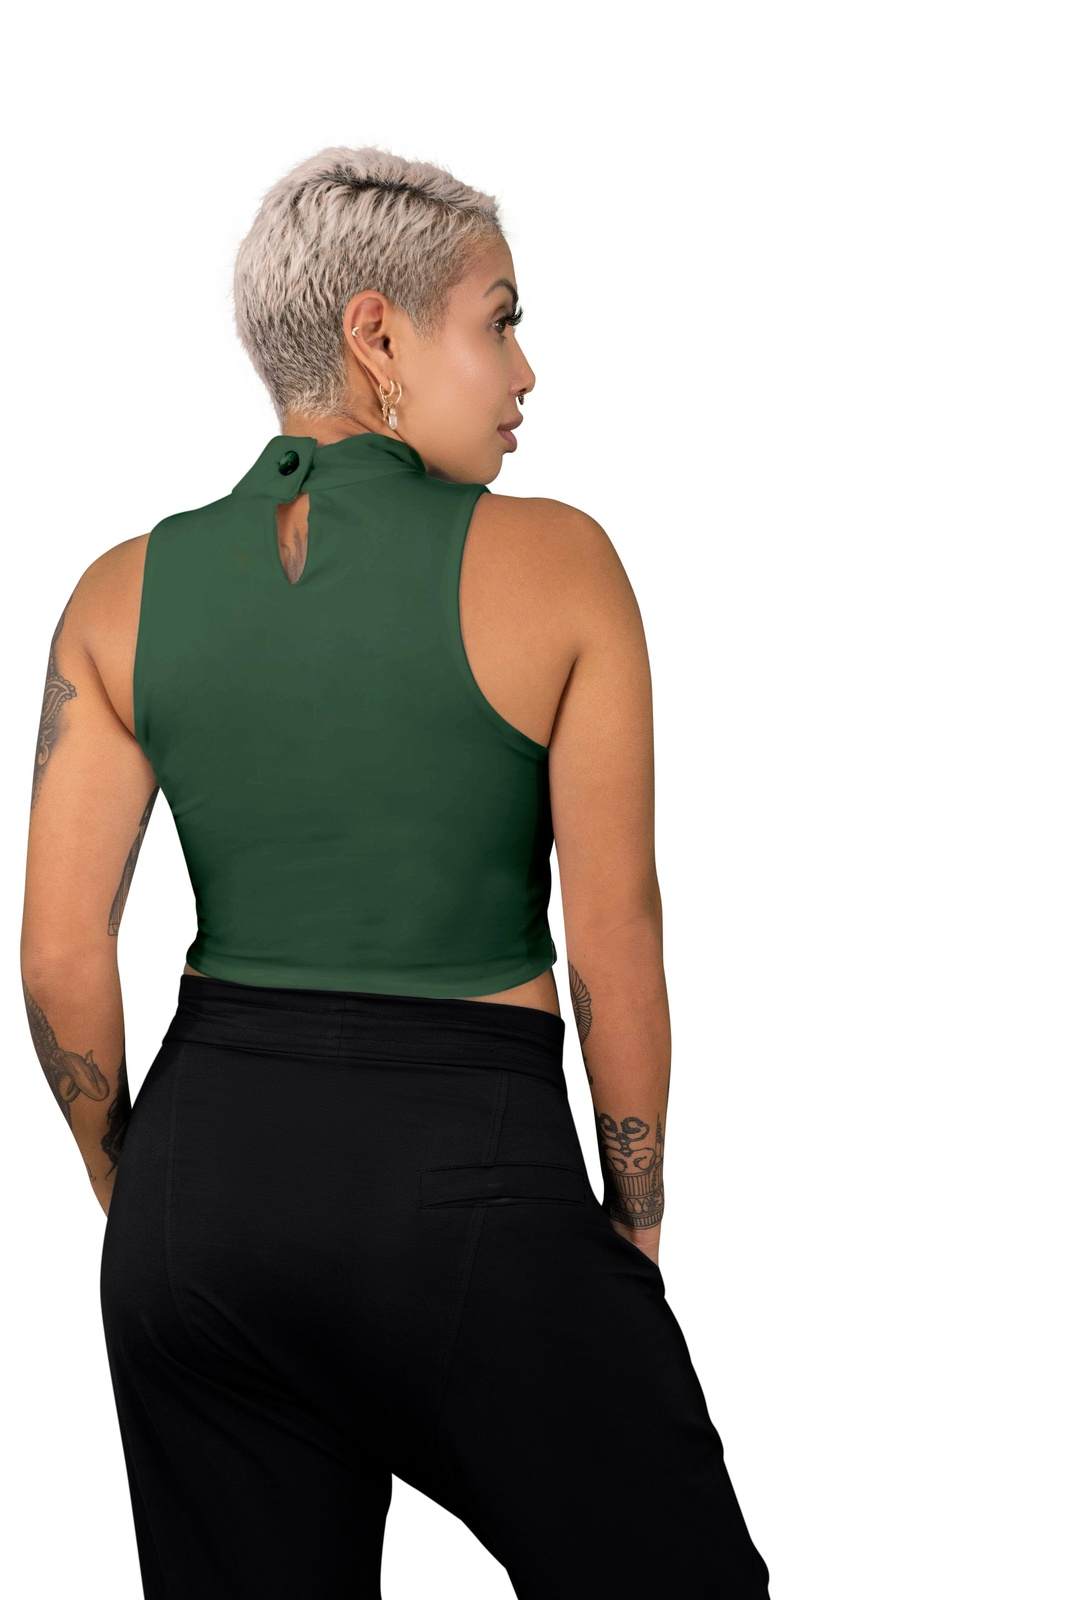 High neck crop top in army green worn with black harem pants made by Ekoluxe sustainable loungewear brand 